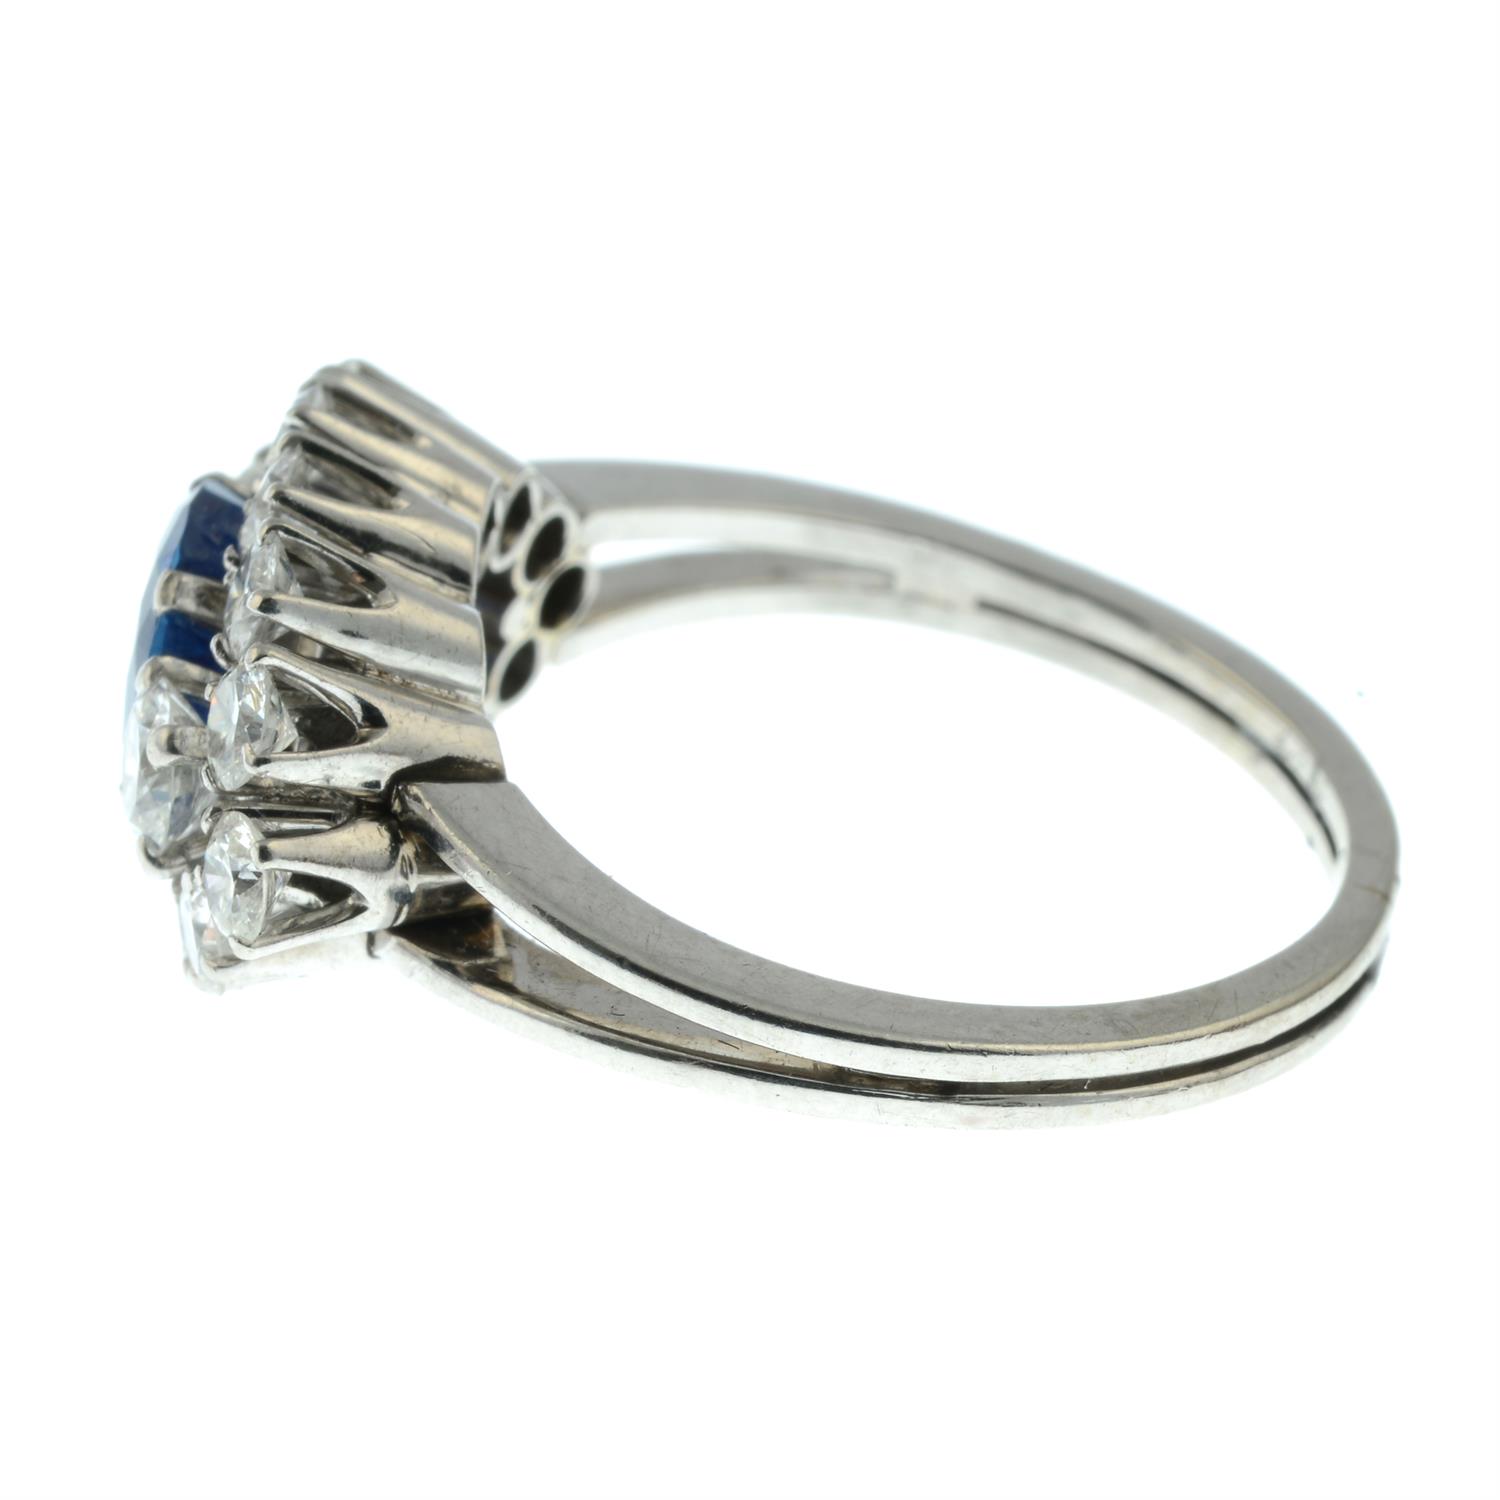 A Basaltic sapphire and brilliant-cut diamond dress ring. - Image 3 of 5